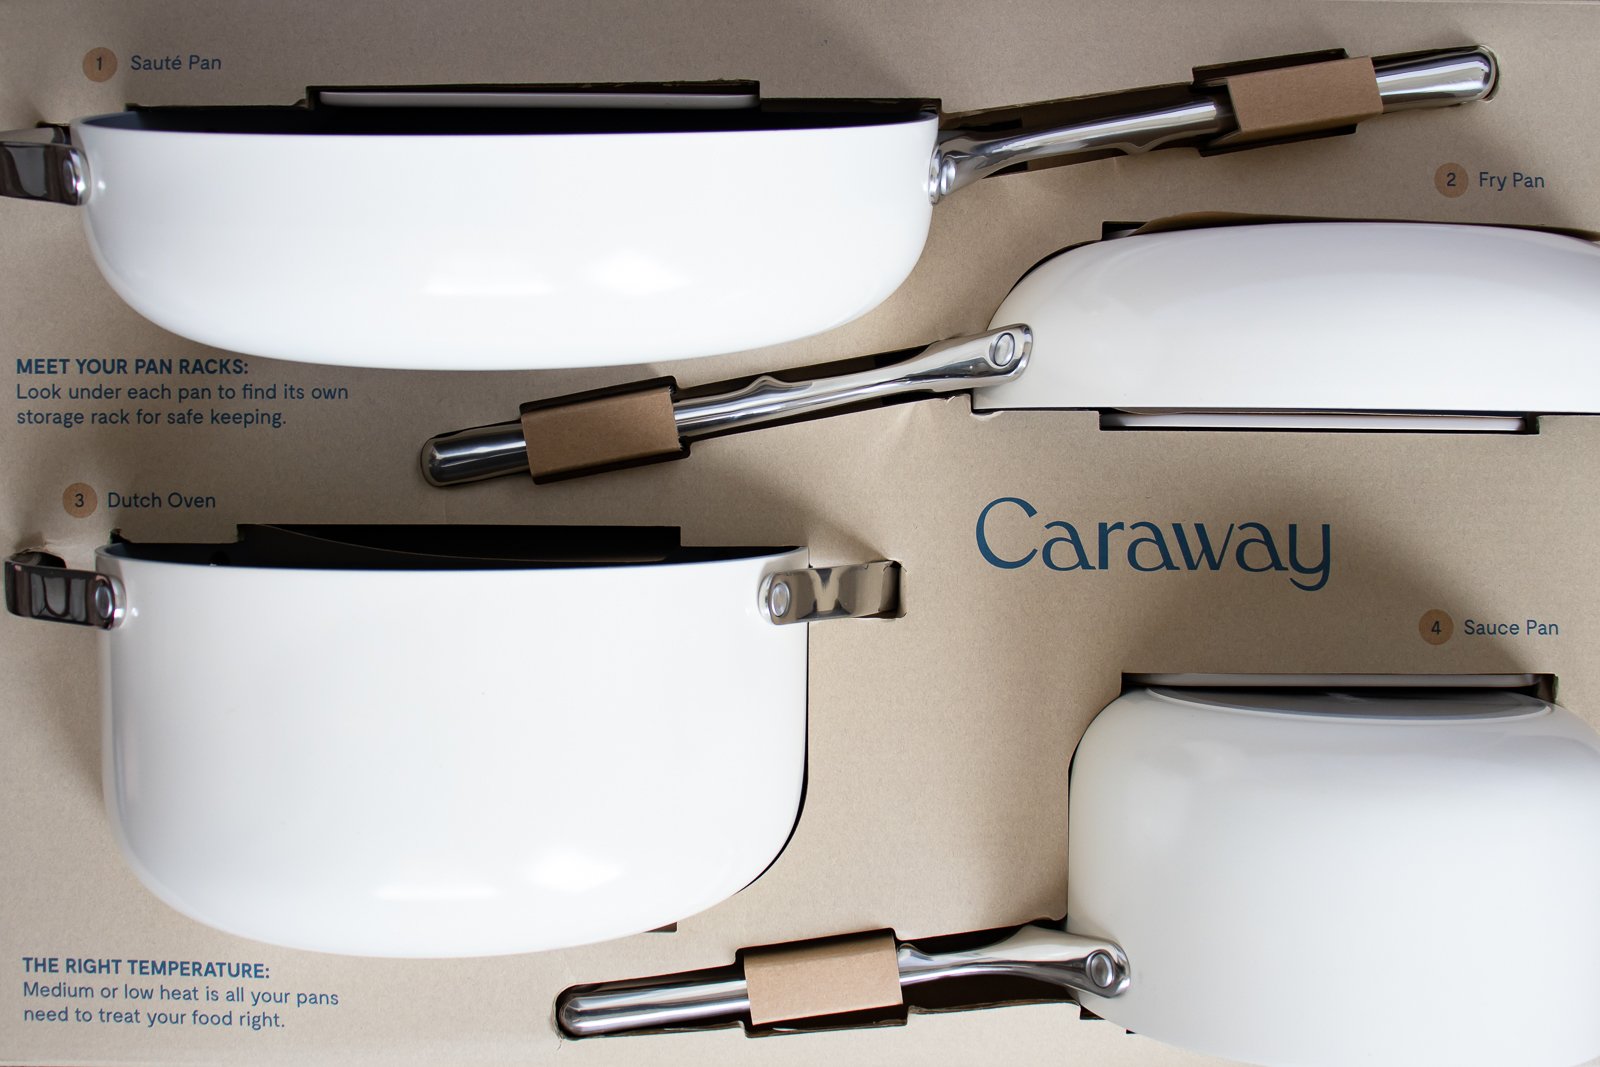 Caraway Cookware Review: What We Really Think of the Popular